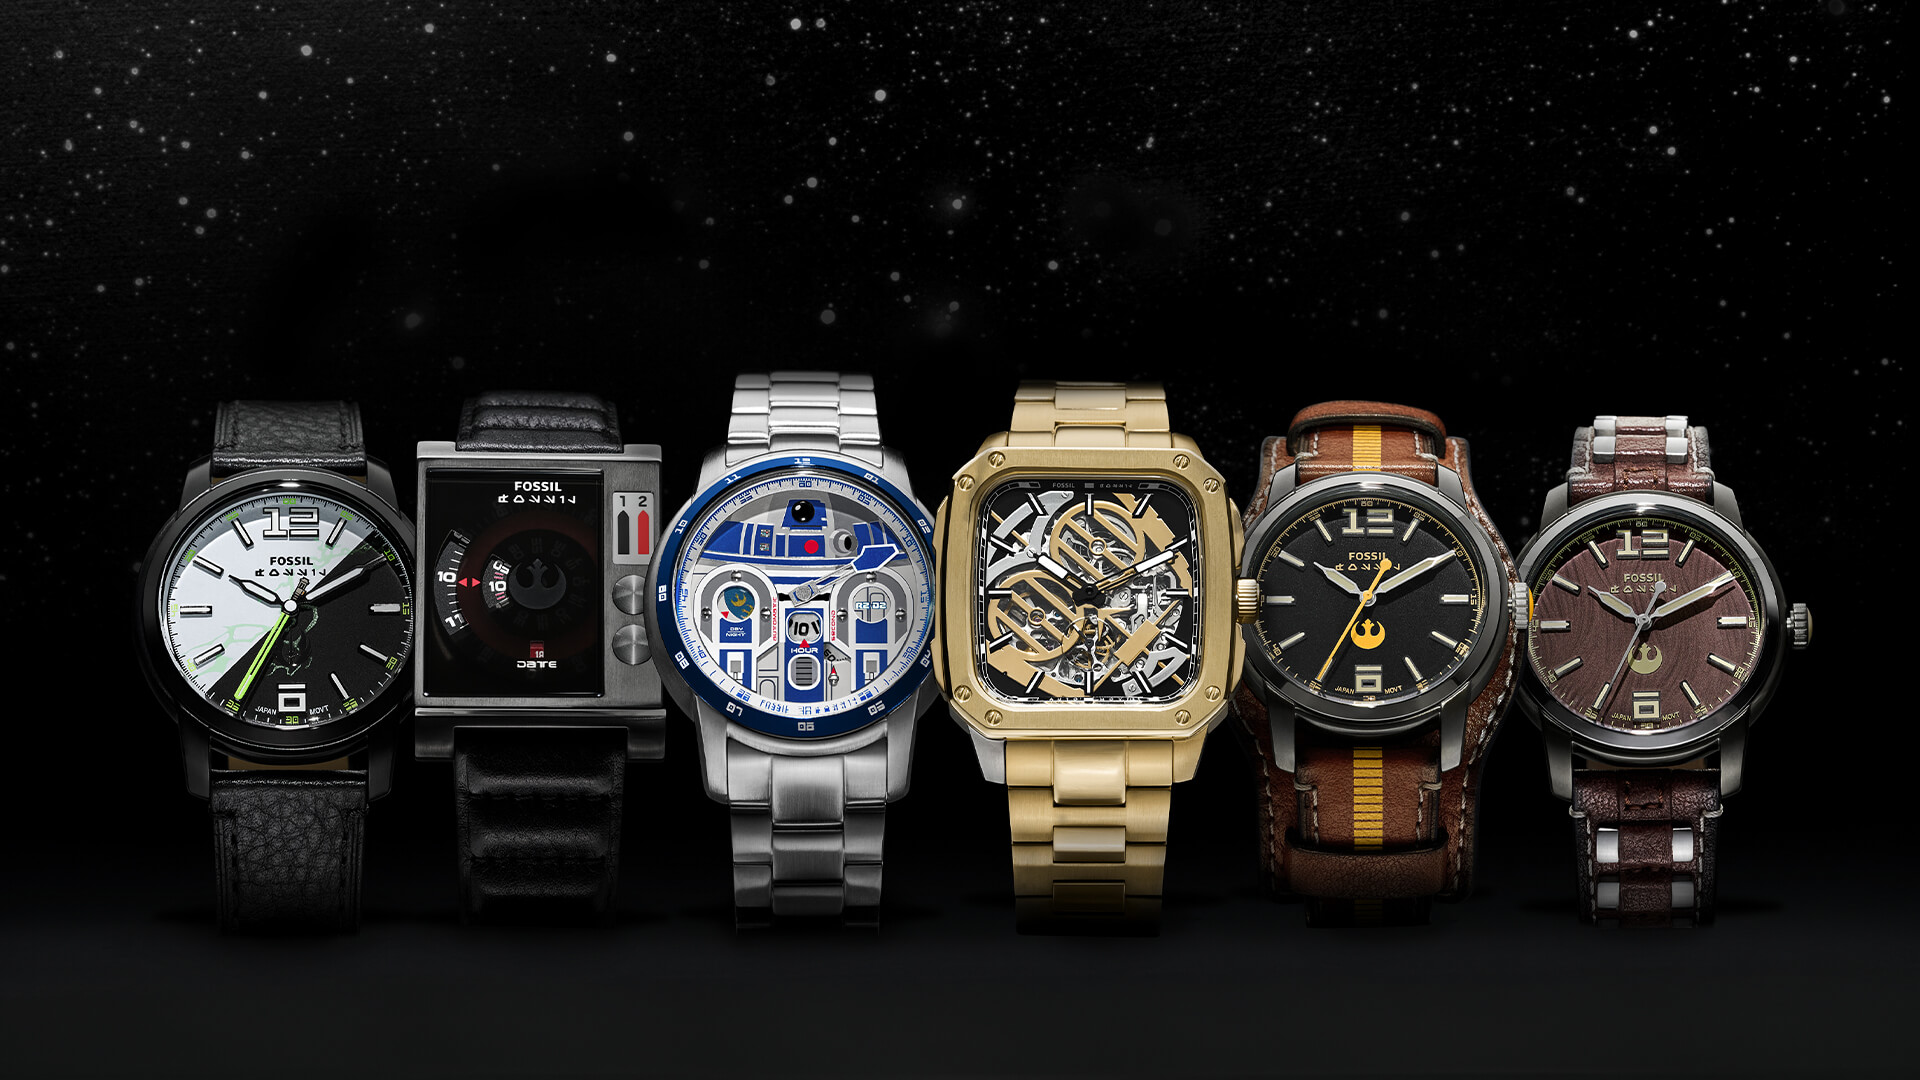 6 star wars inspired watches